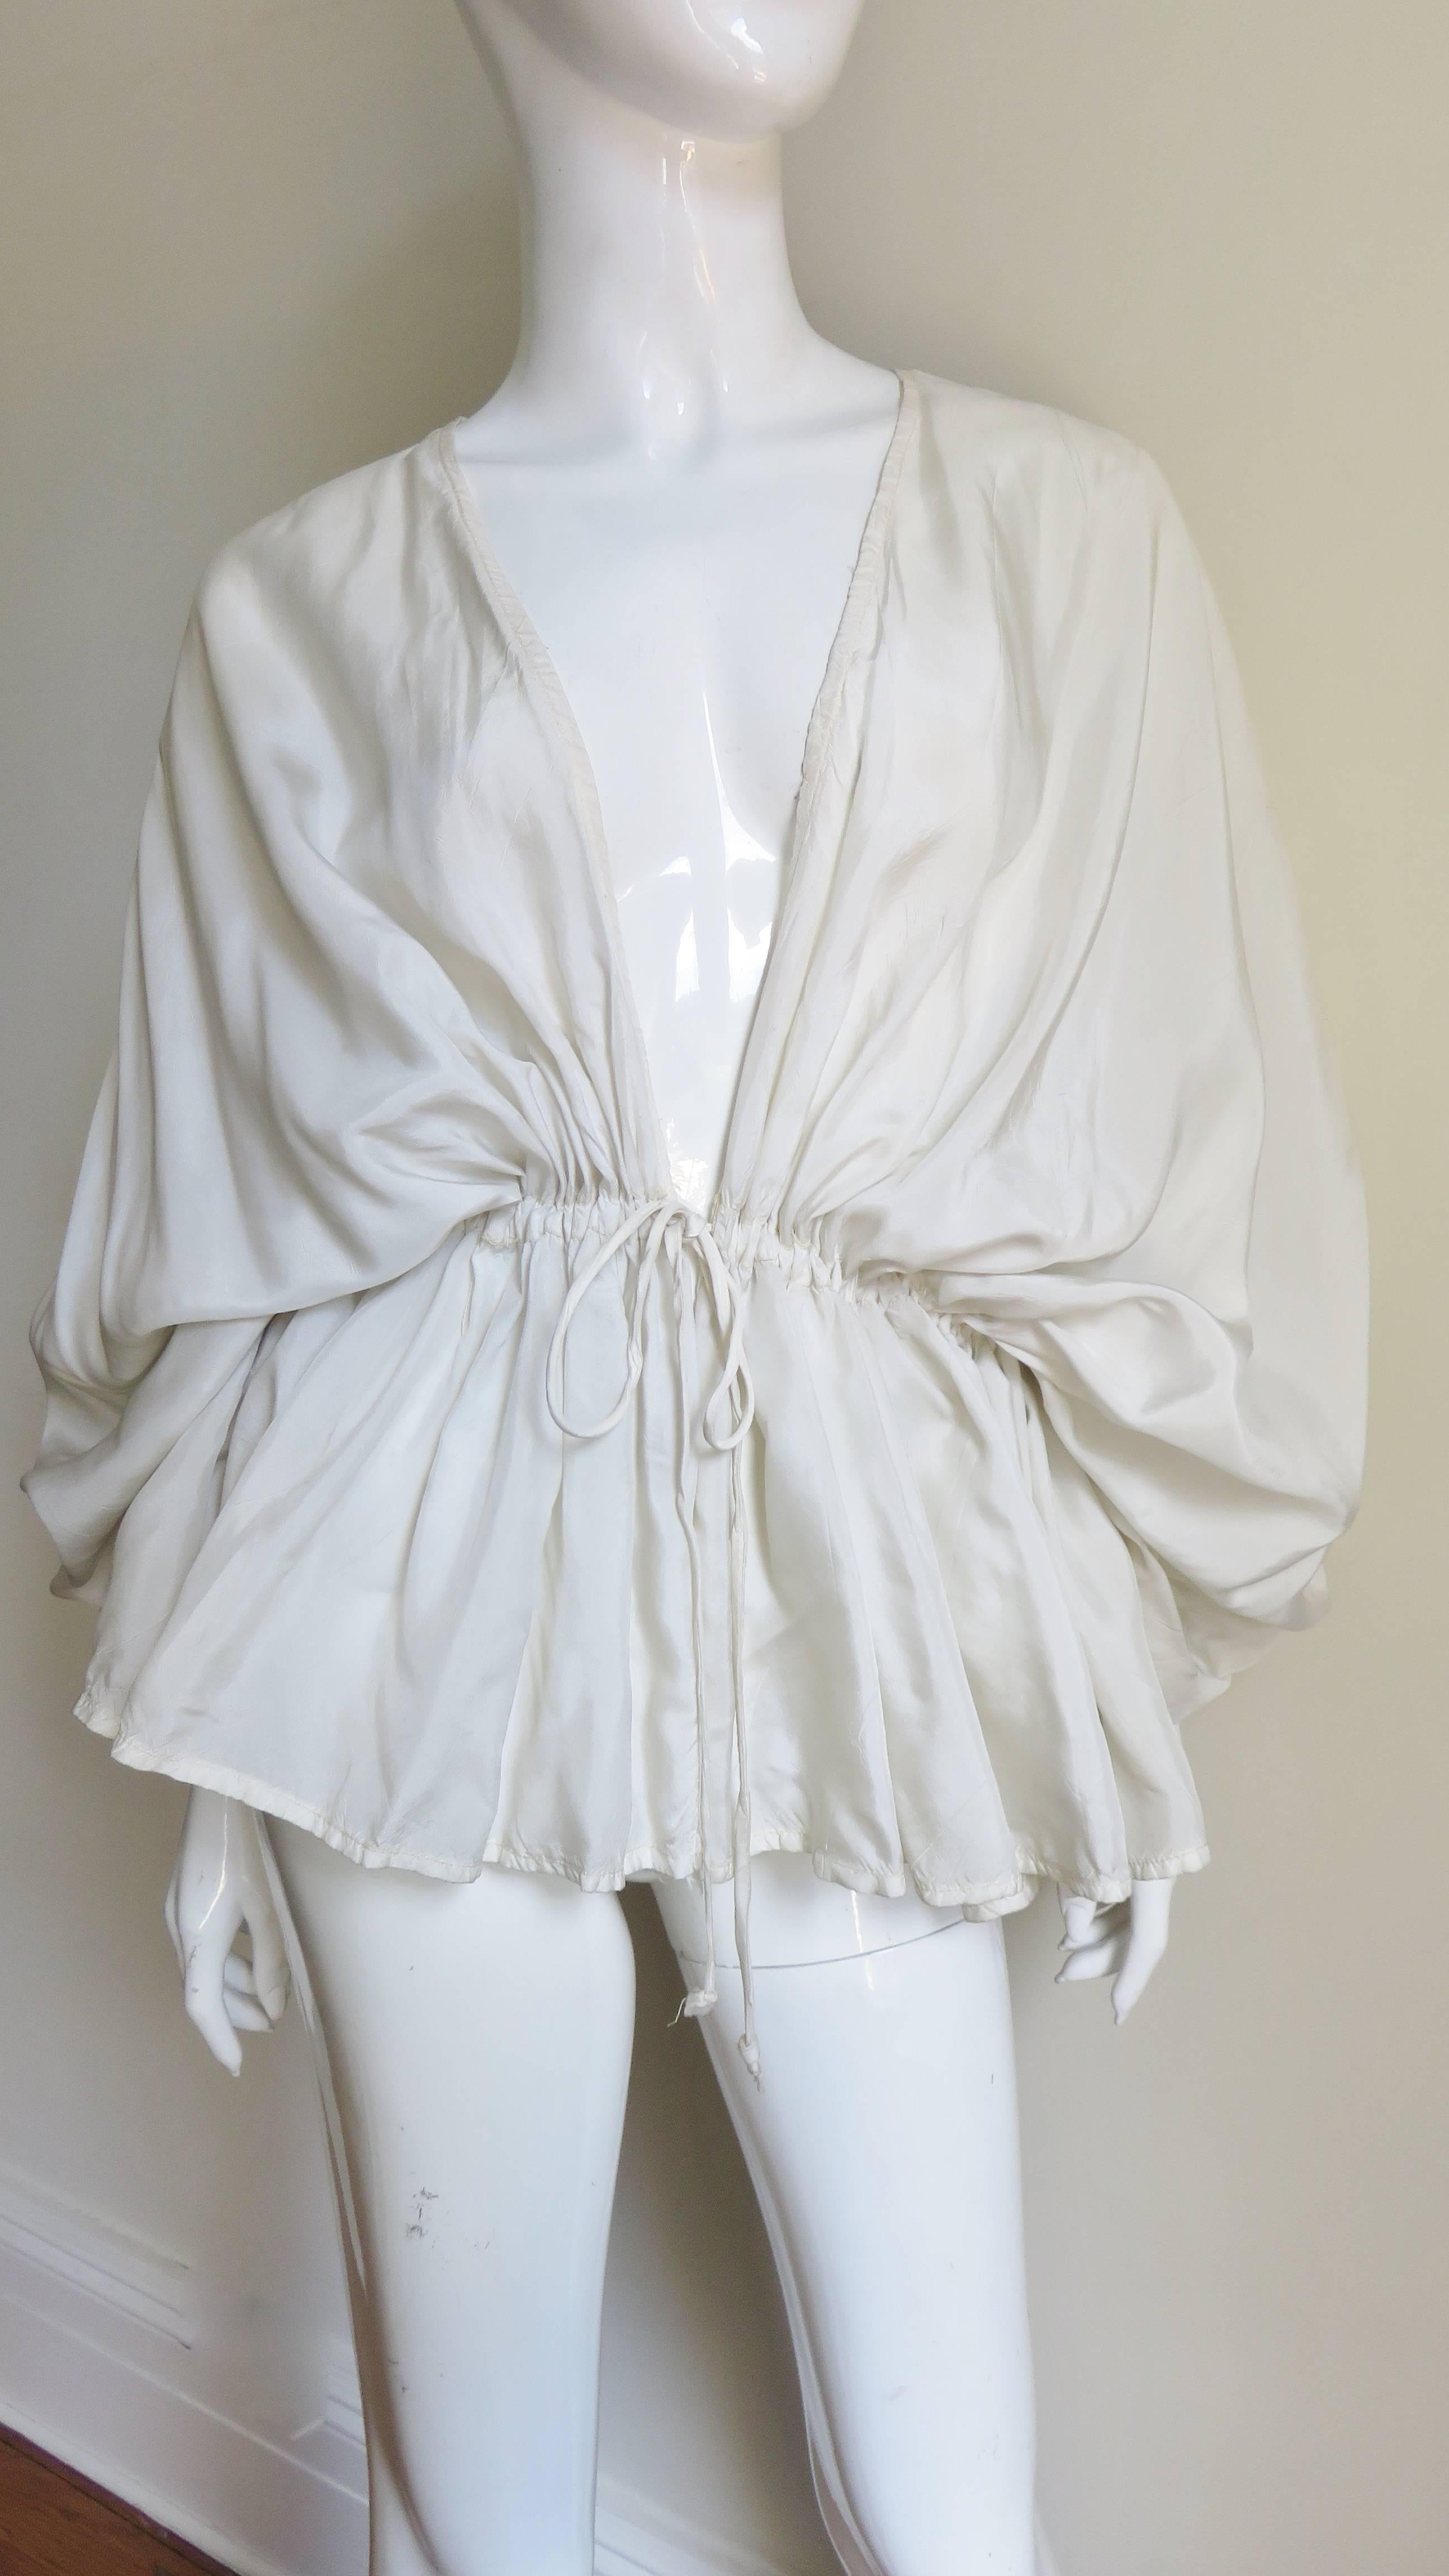 A pretty 1970's silk shirt with drawstring draped shoulders and a drawstring tie waist creating a full peplum.  The neckline is plunging to the waist.   VINTAGE SCHIECK
Excellent condition.  One size fits all.

Bust  Open
Waist  Open
Length  28"